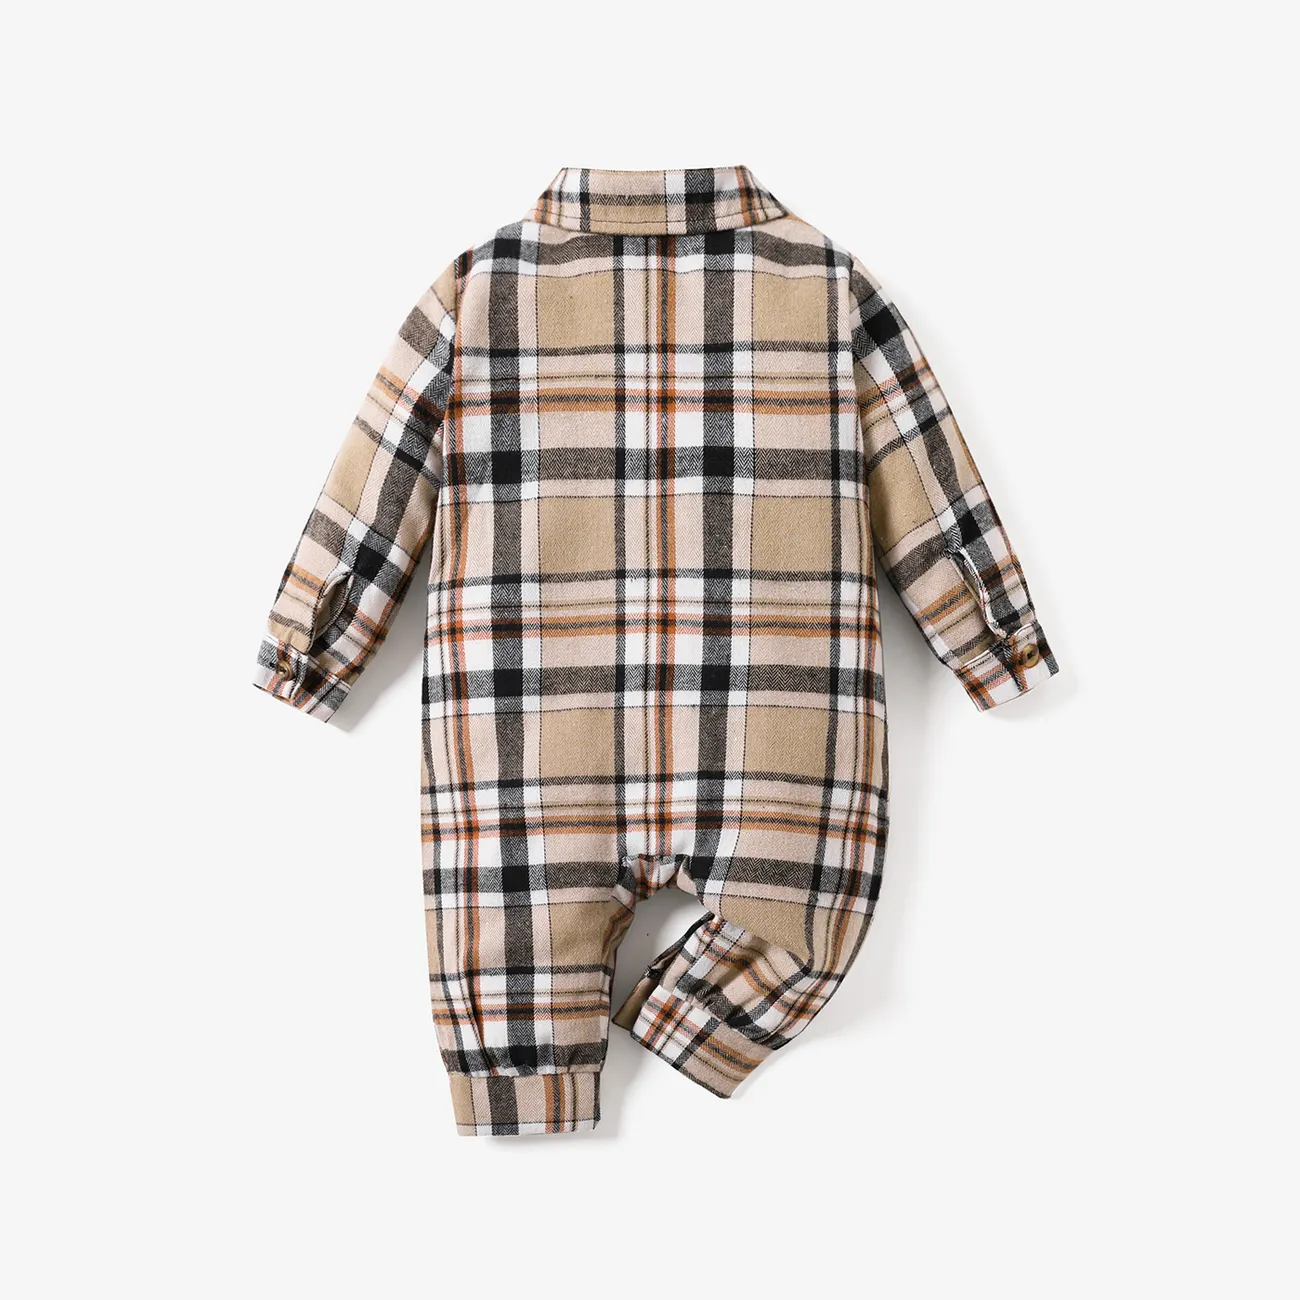 Baby Boy/Girl Button Front Long-sleeve Plaid Jumpsuit Brown big image 1